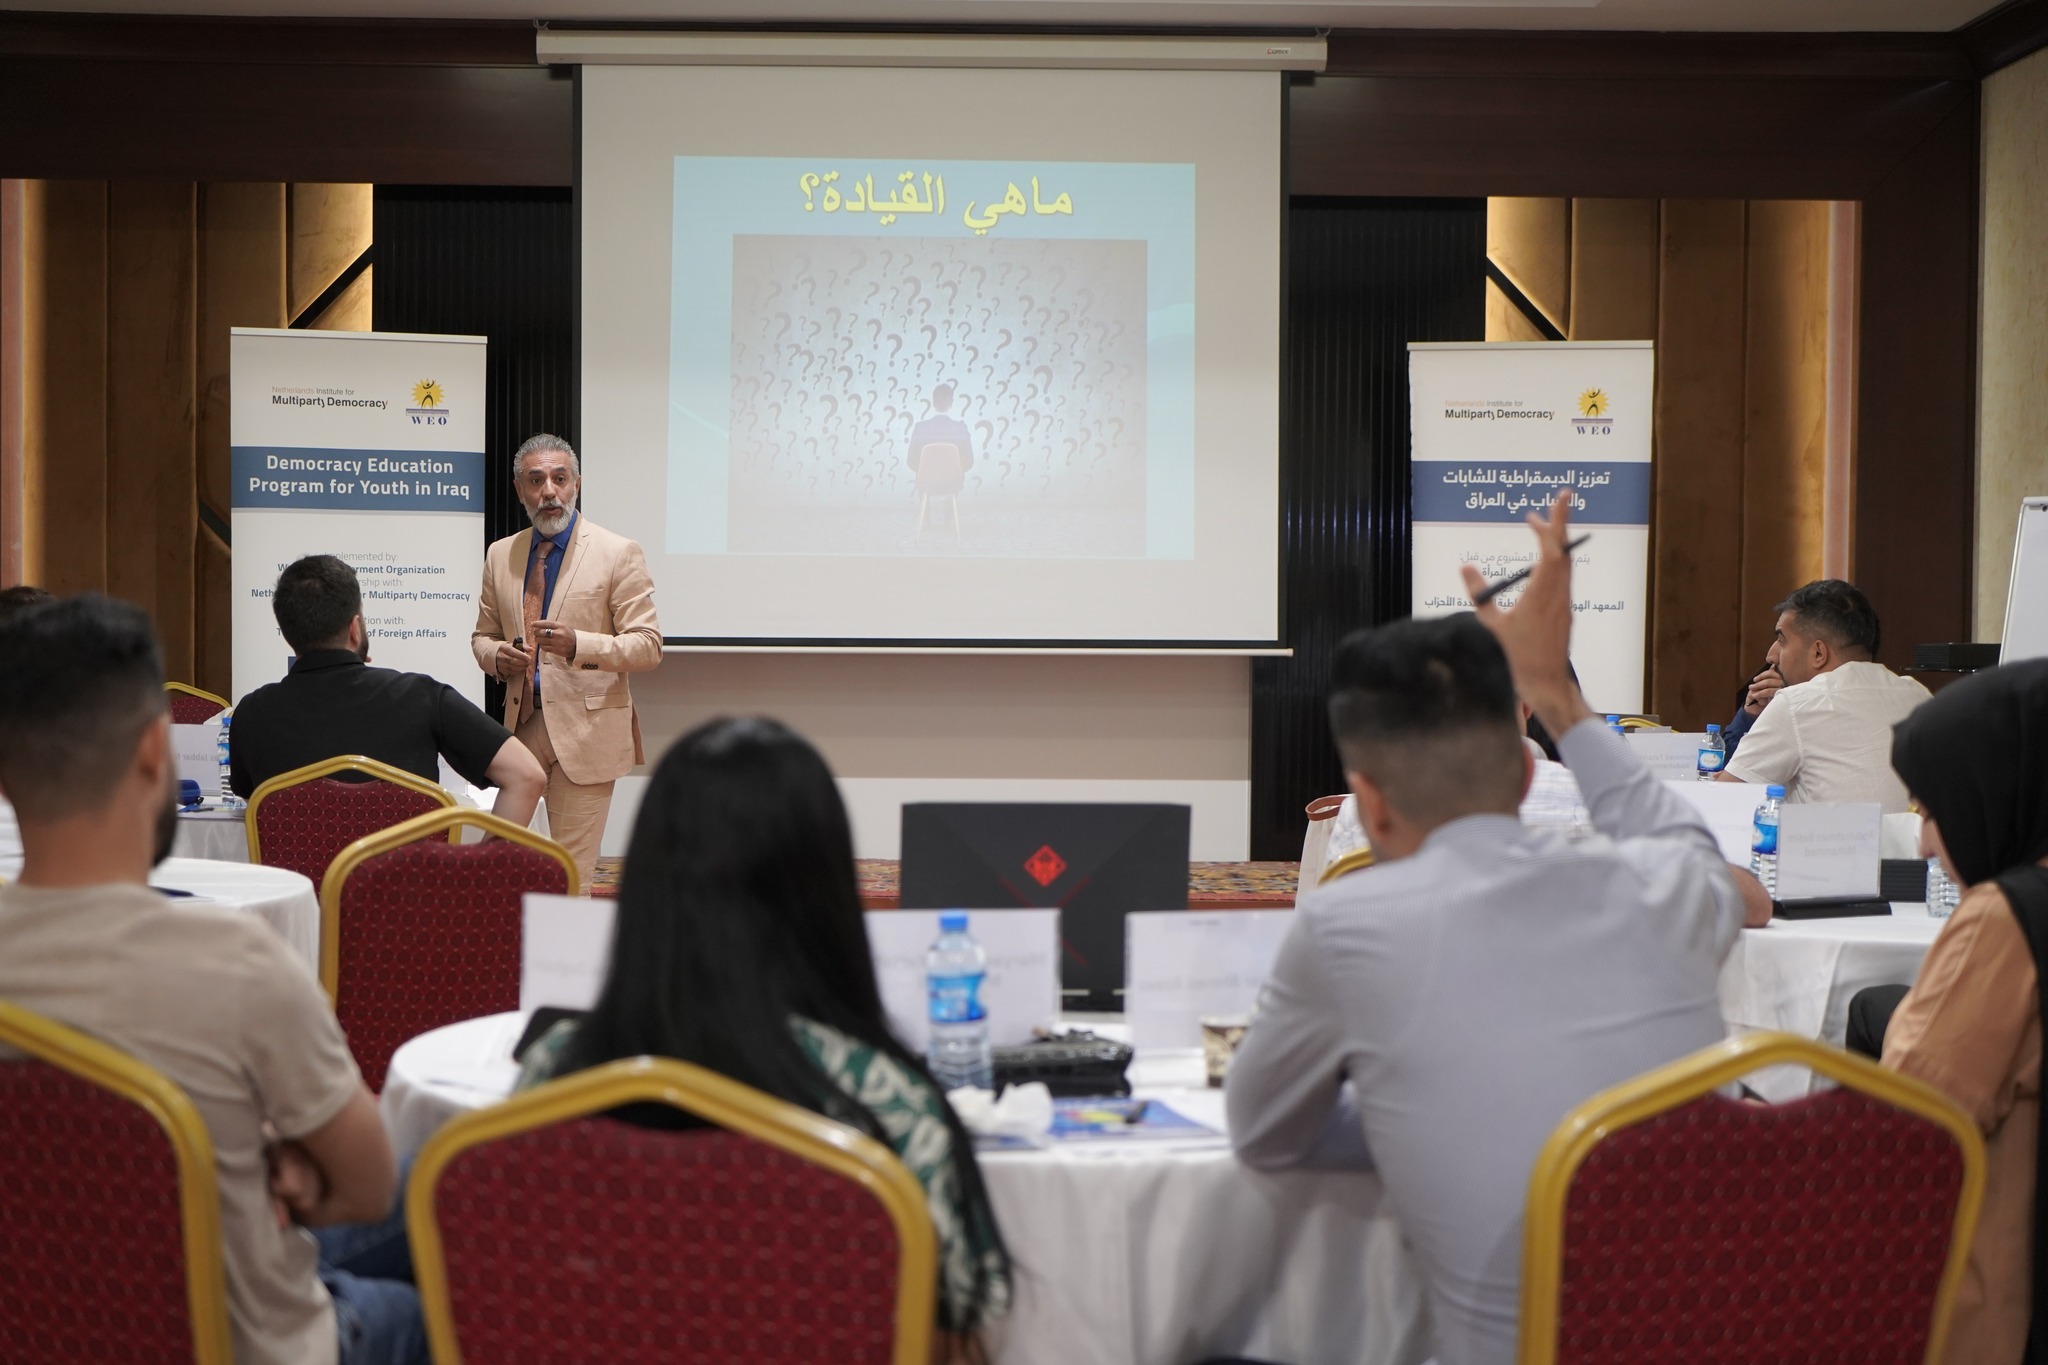 Second round of the "Democracy Education for Youth in Iraq"